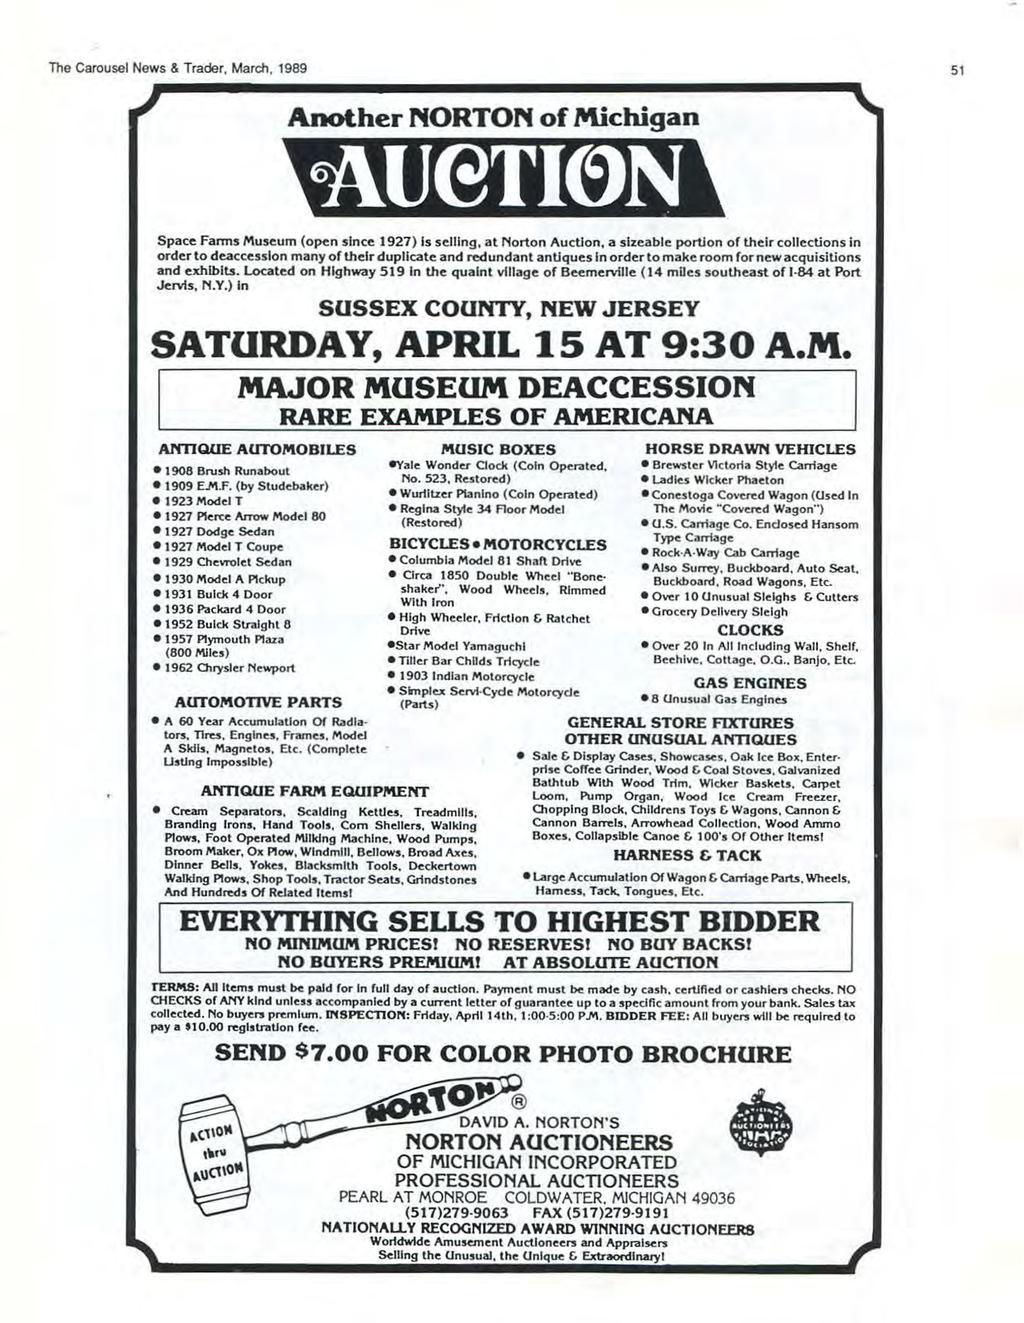 The Carousel News & Trader, March, 1989 51 Another NORTON of Michigan Space Farms Museum (open since 1927) Is selling, at Norton Auction, a sizeable portion of their collections in order to